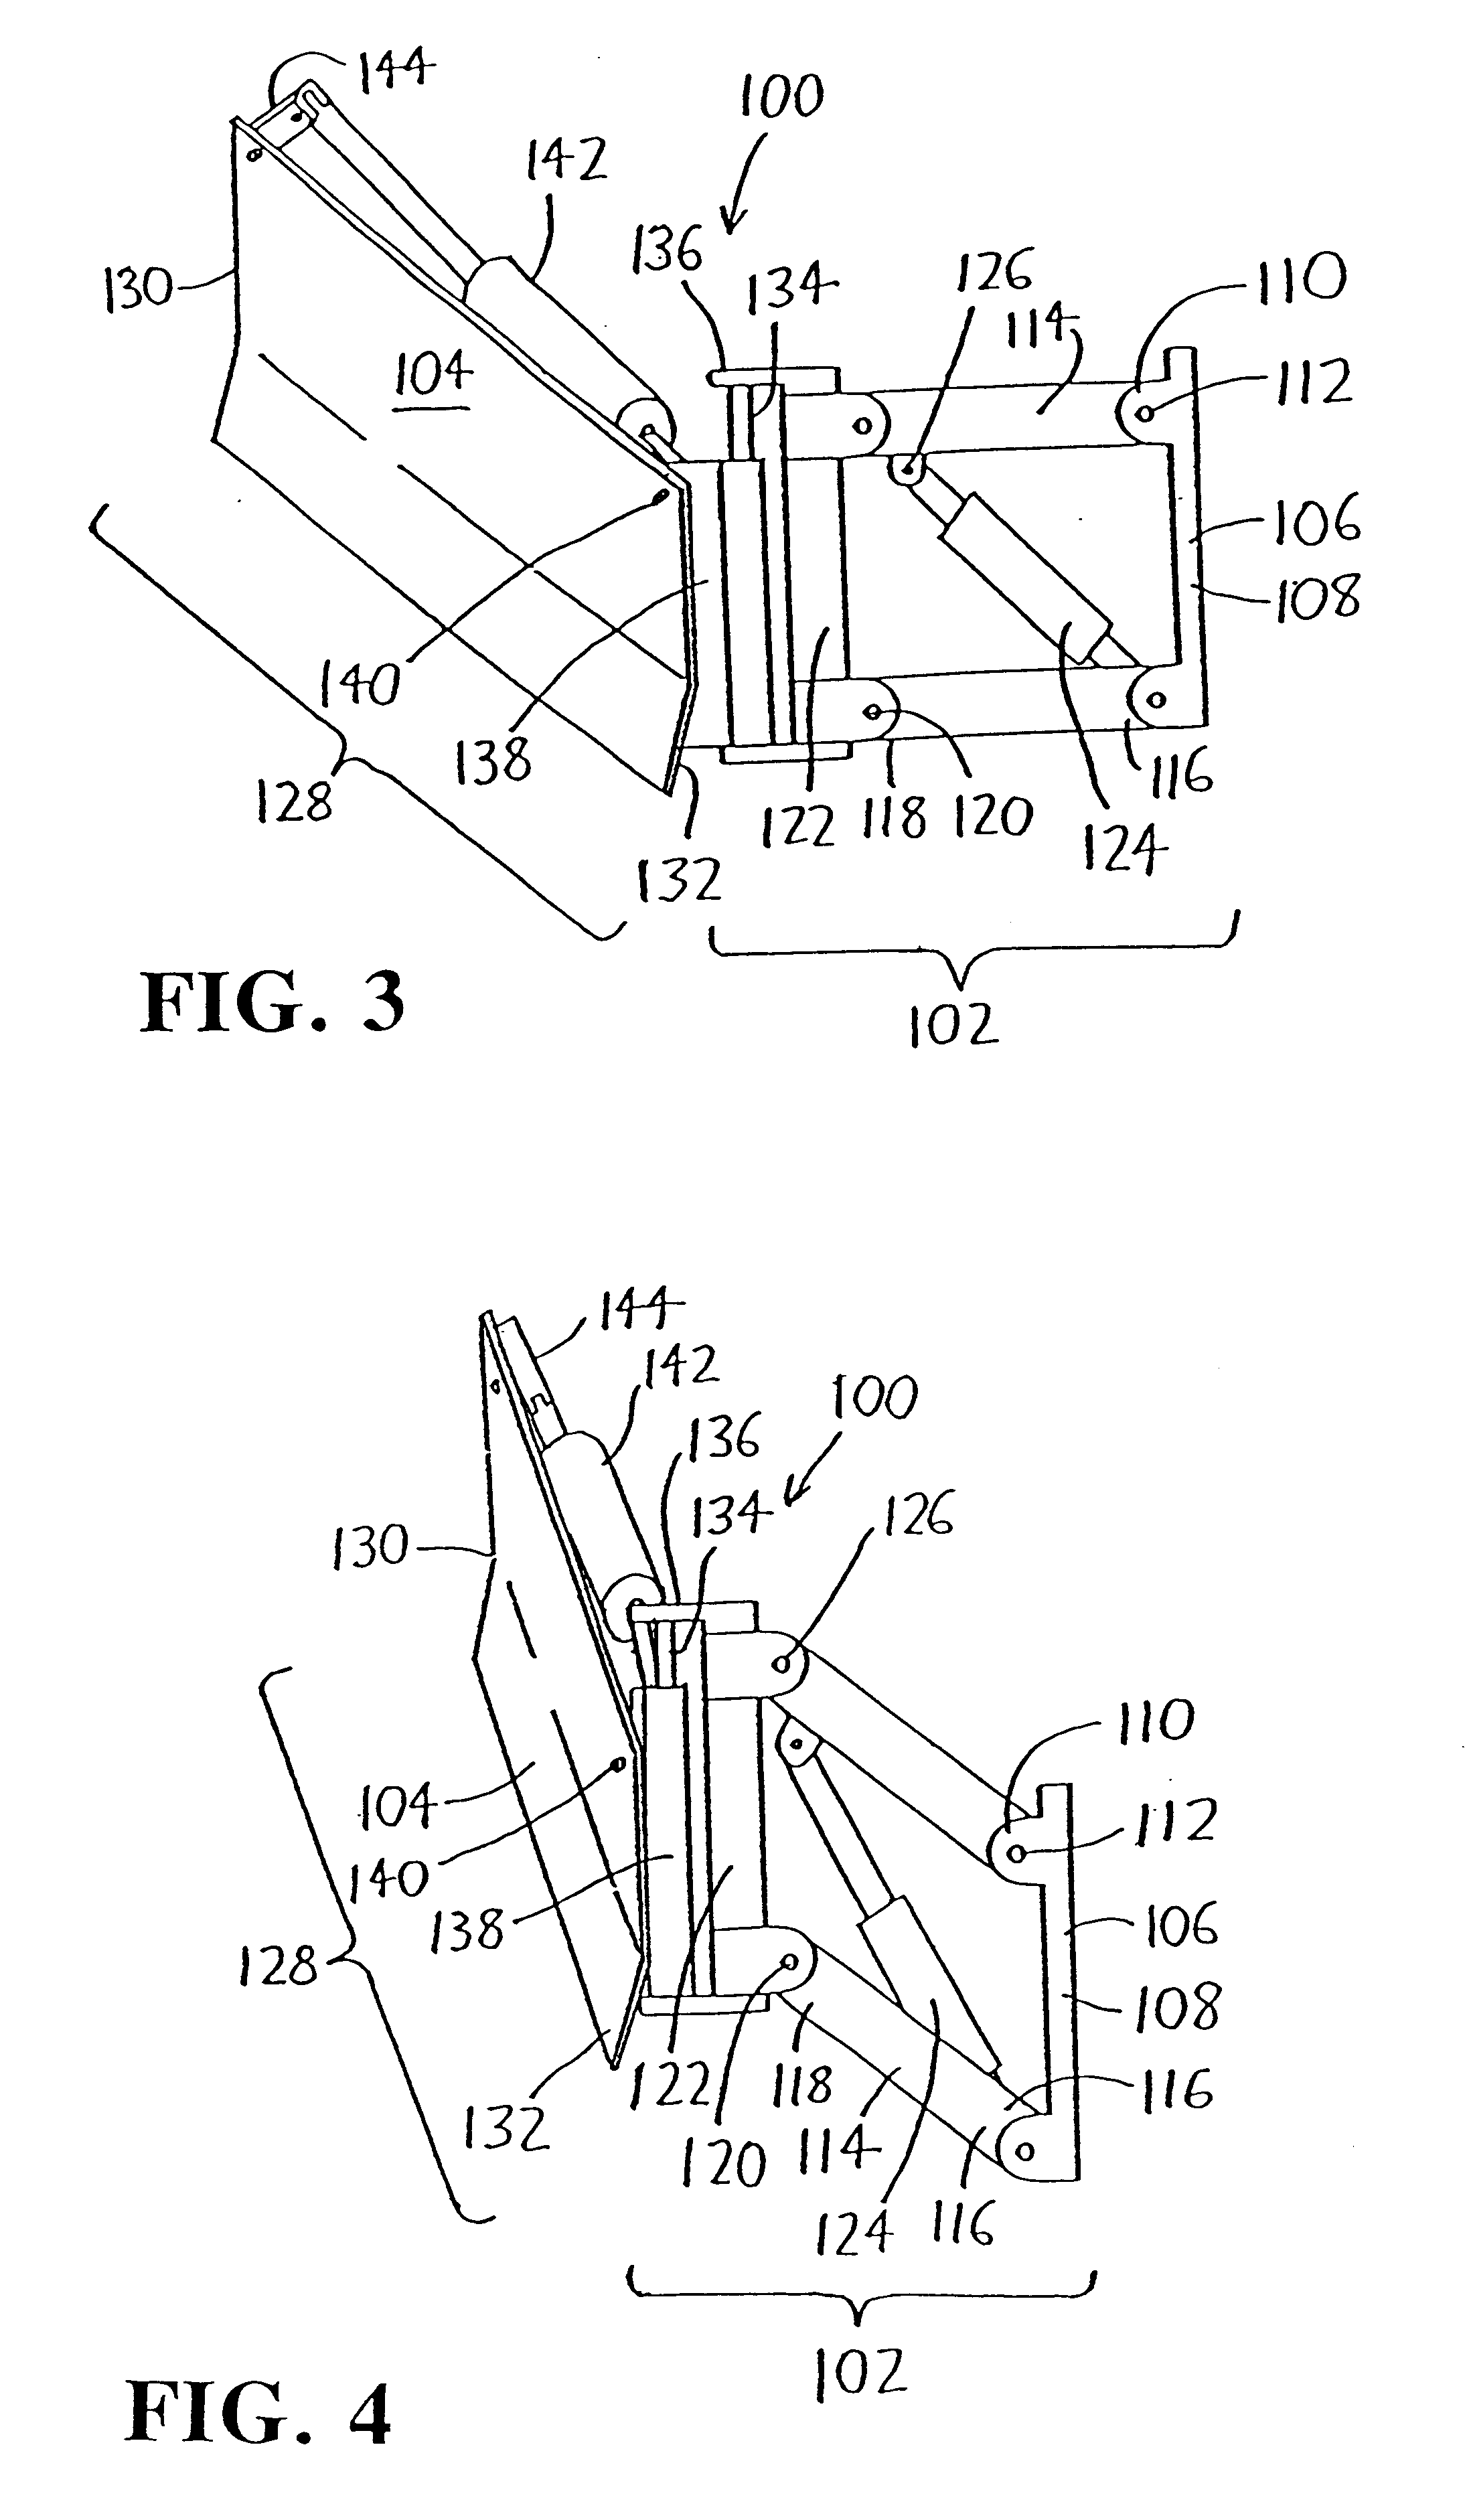 Wing plow assembly